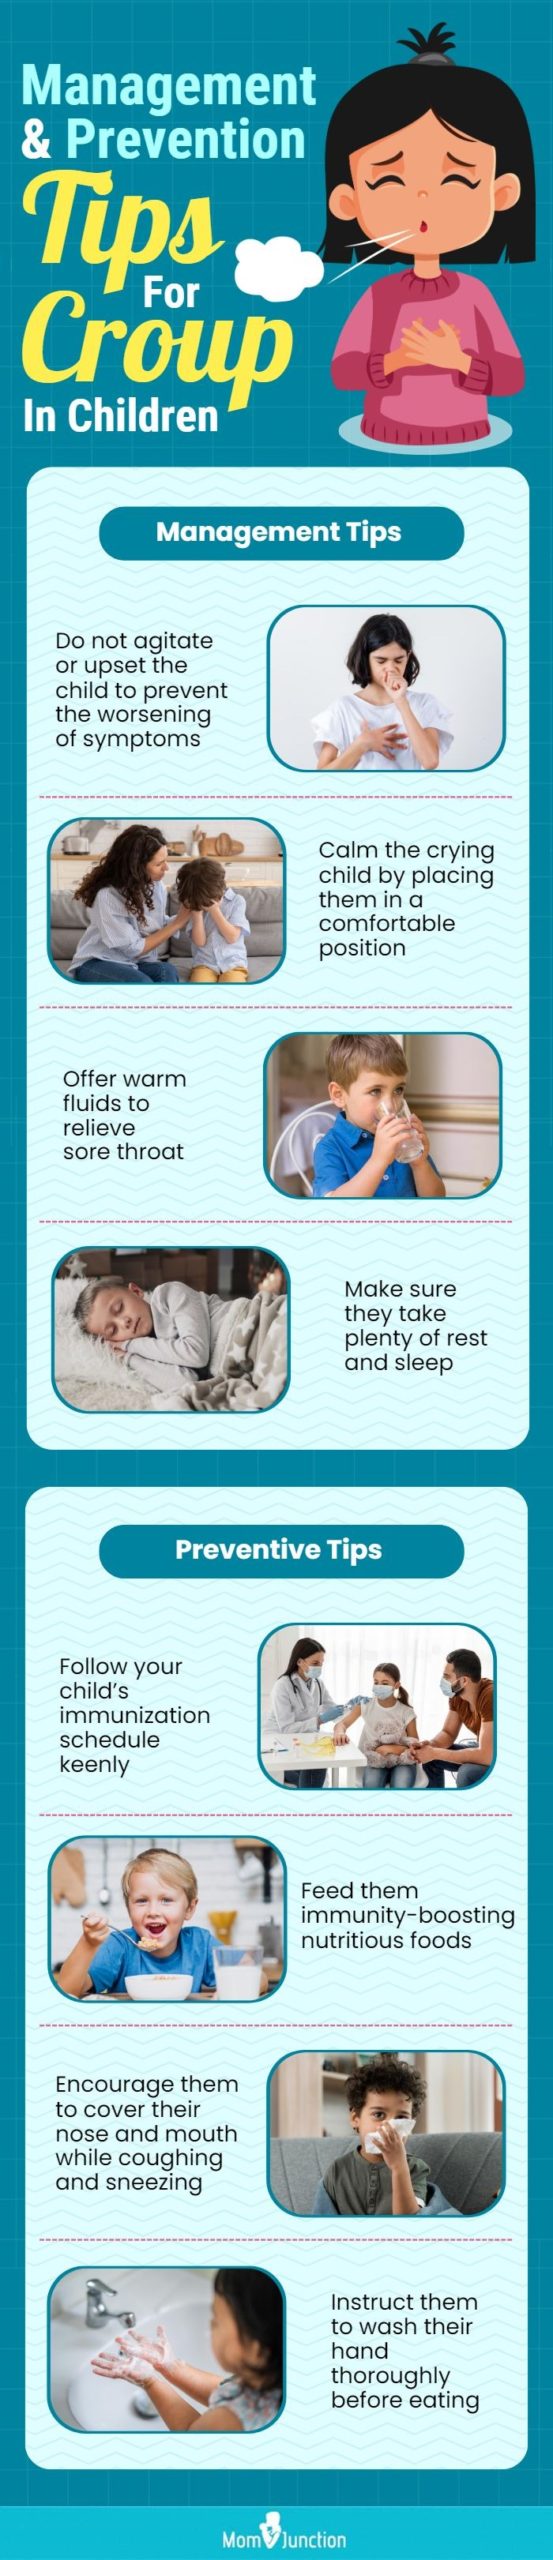 management and prevention tips for croup in children(infographic)